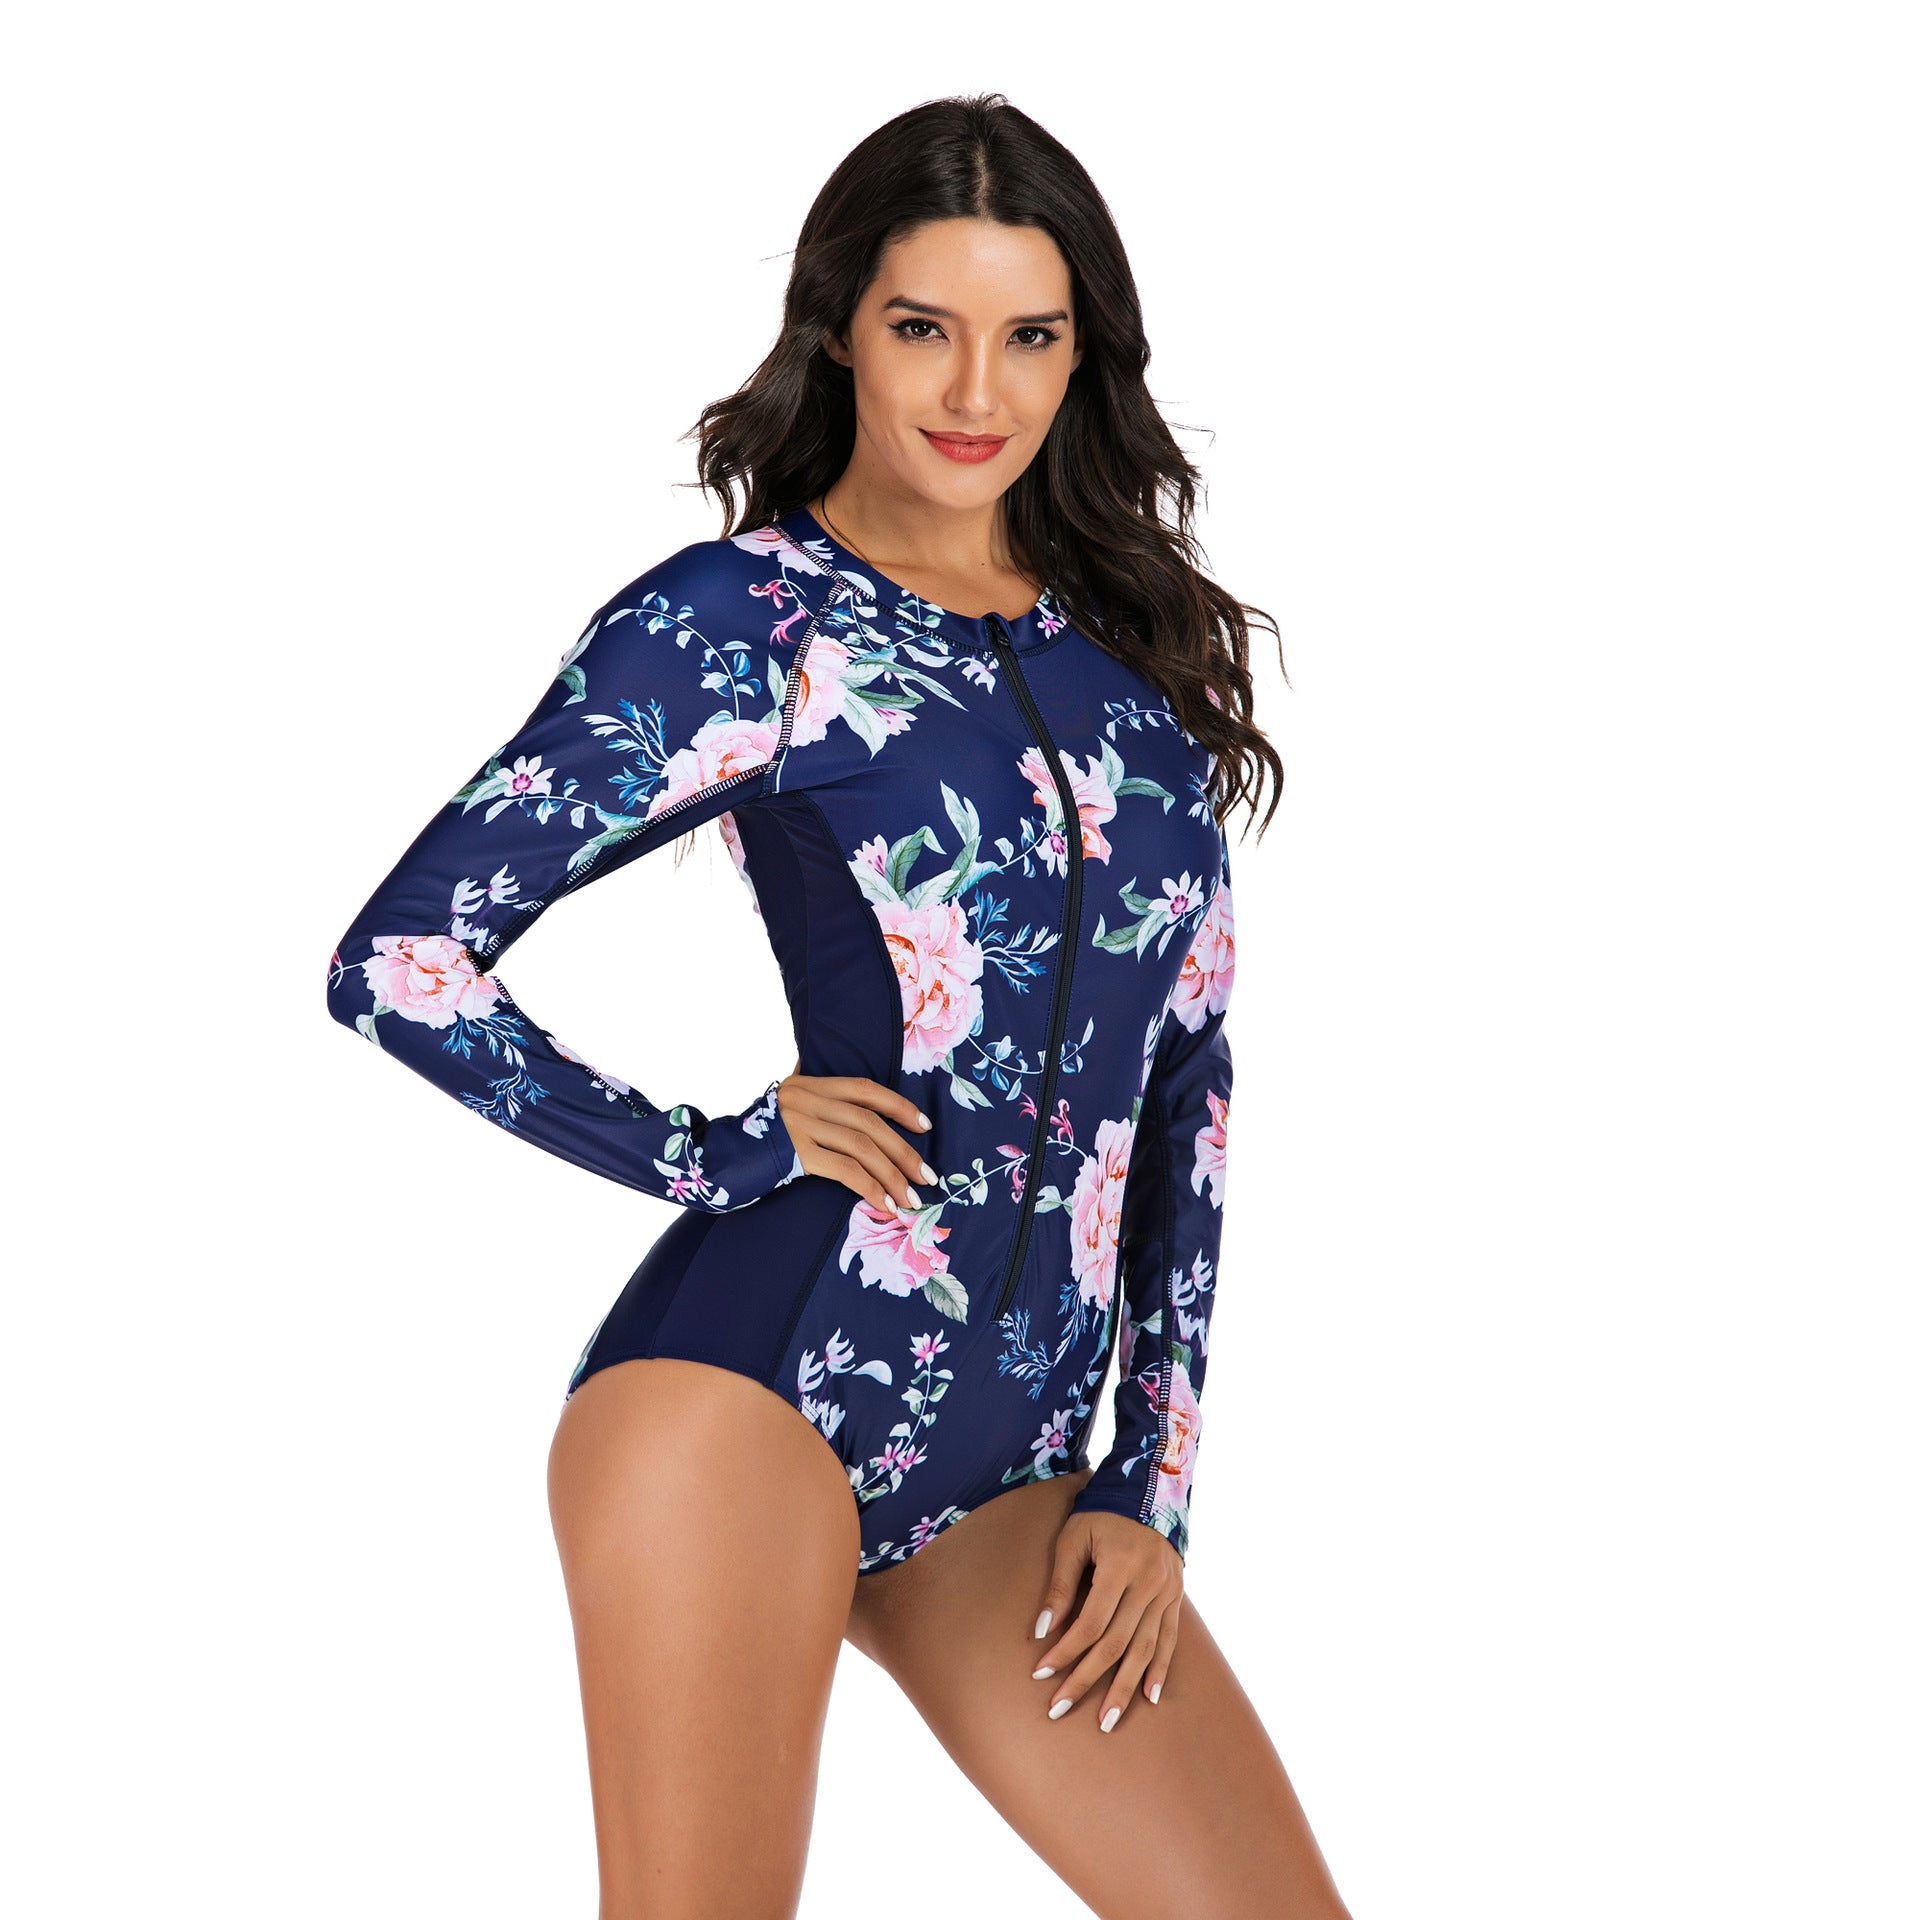 Dark Blue One-piece Long Sleeve Female Swimsuit Hot Spring Swimsuit Diving Swimsuit--Free Shipping at meselling99